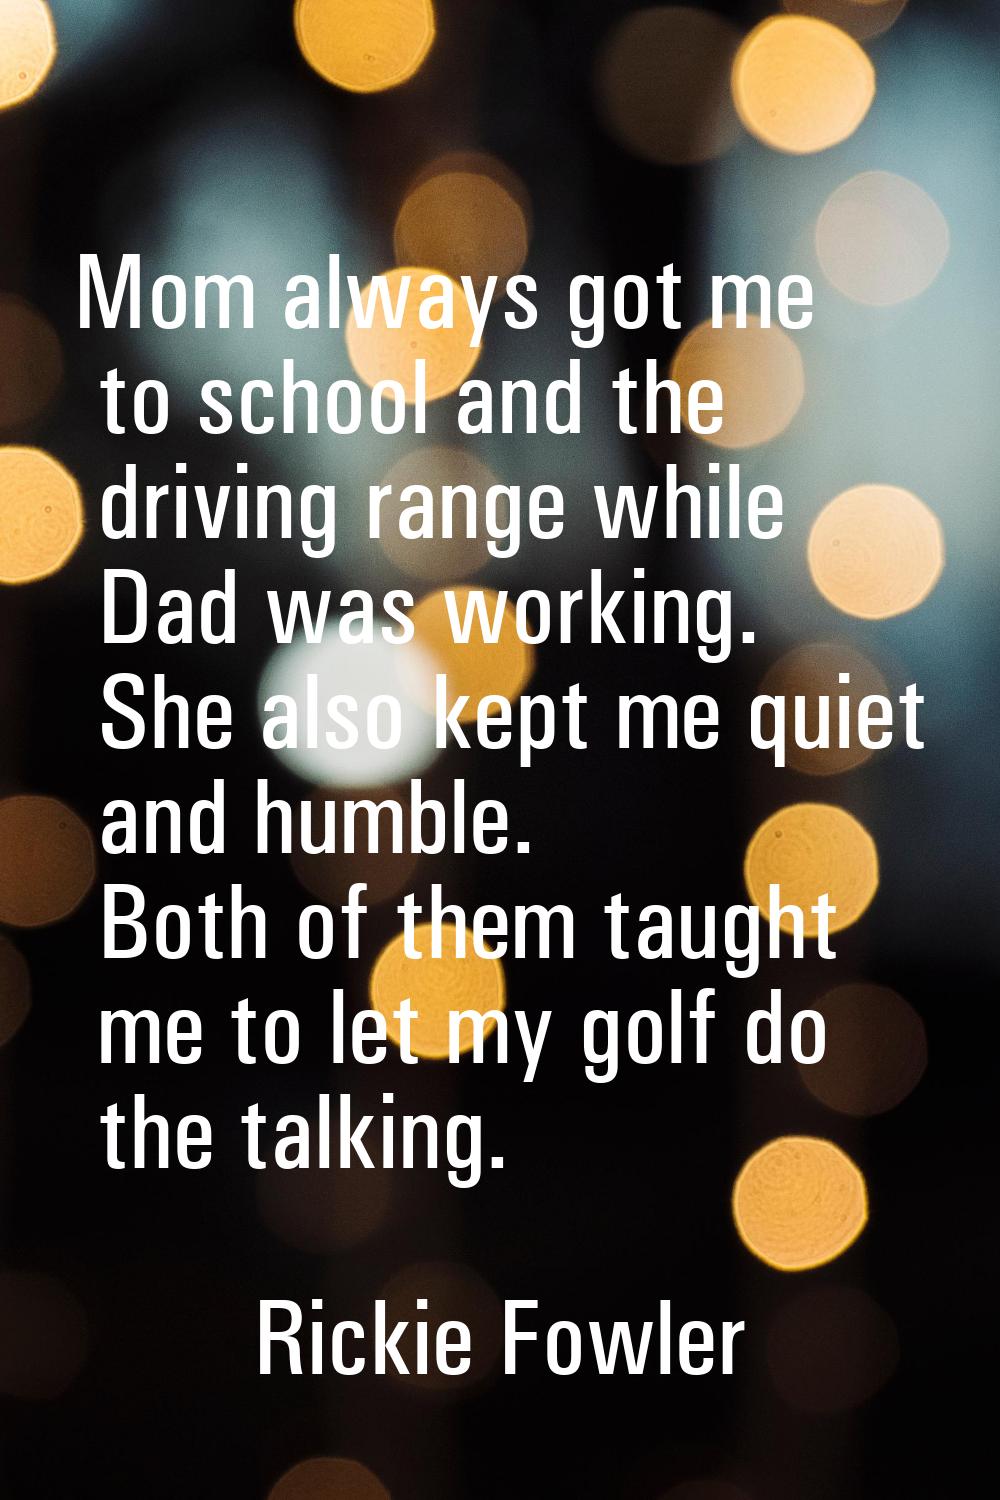 Mom always got me to school and the driving range while Dad was working. She also kept me quiet and